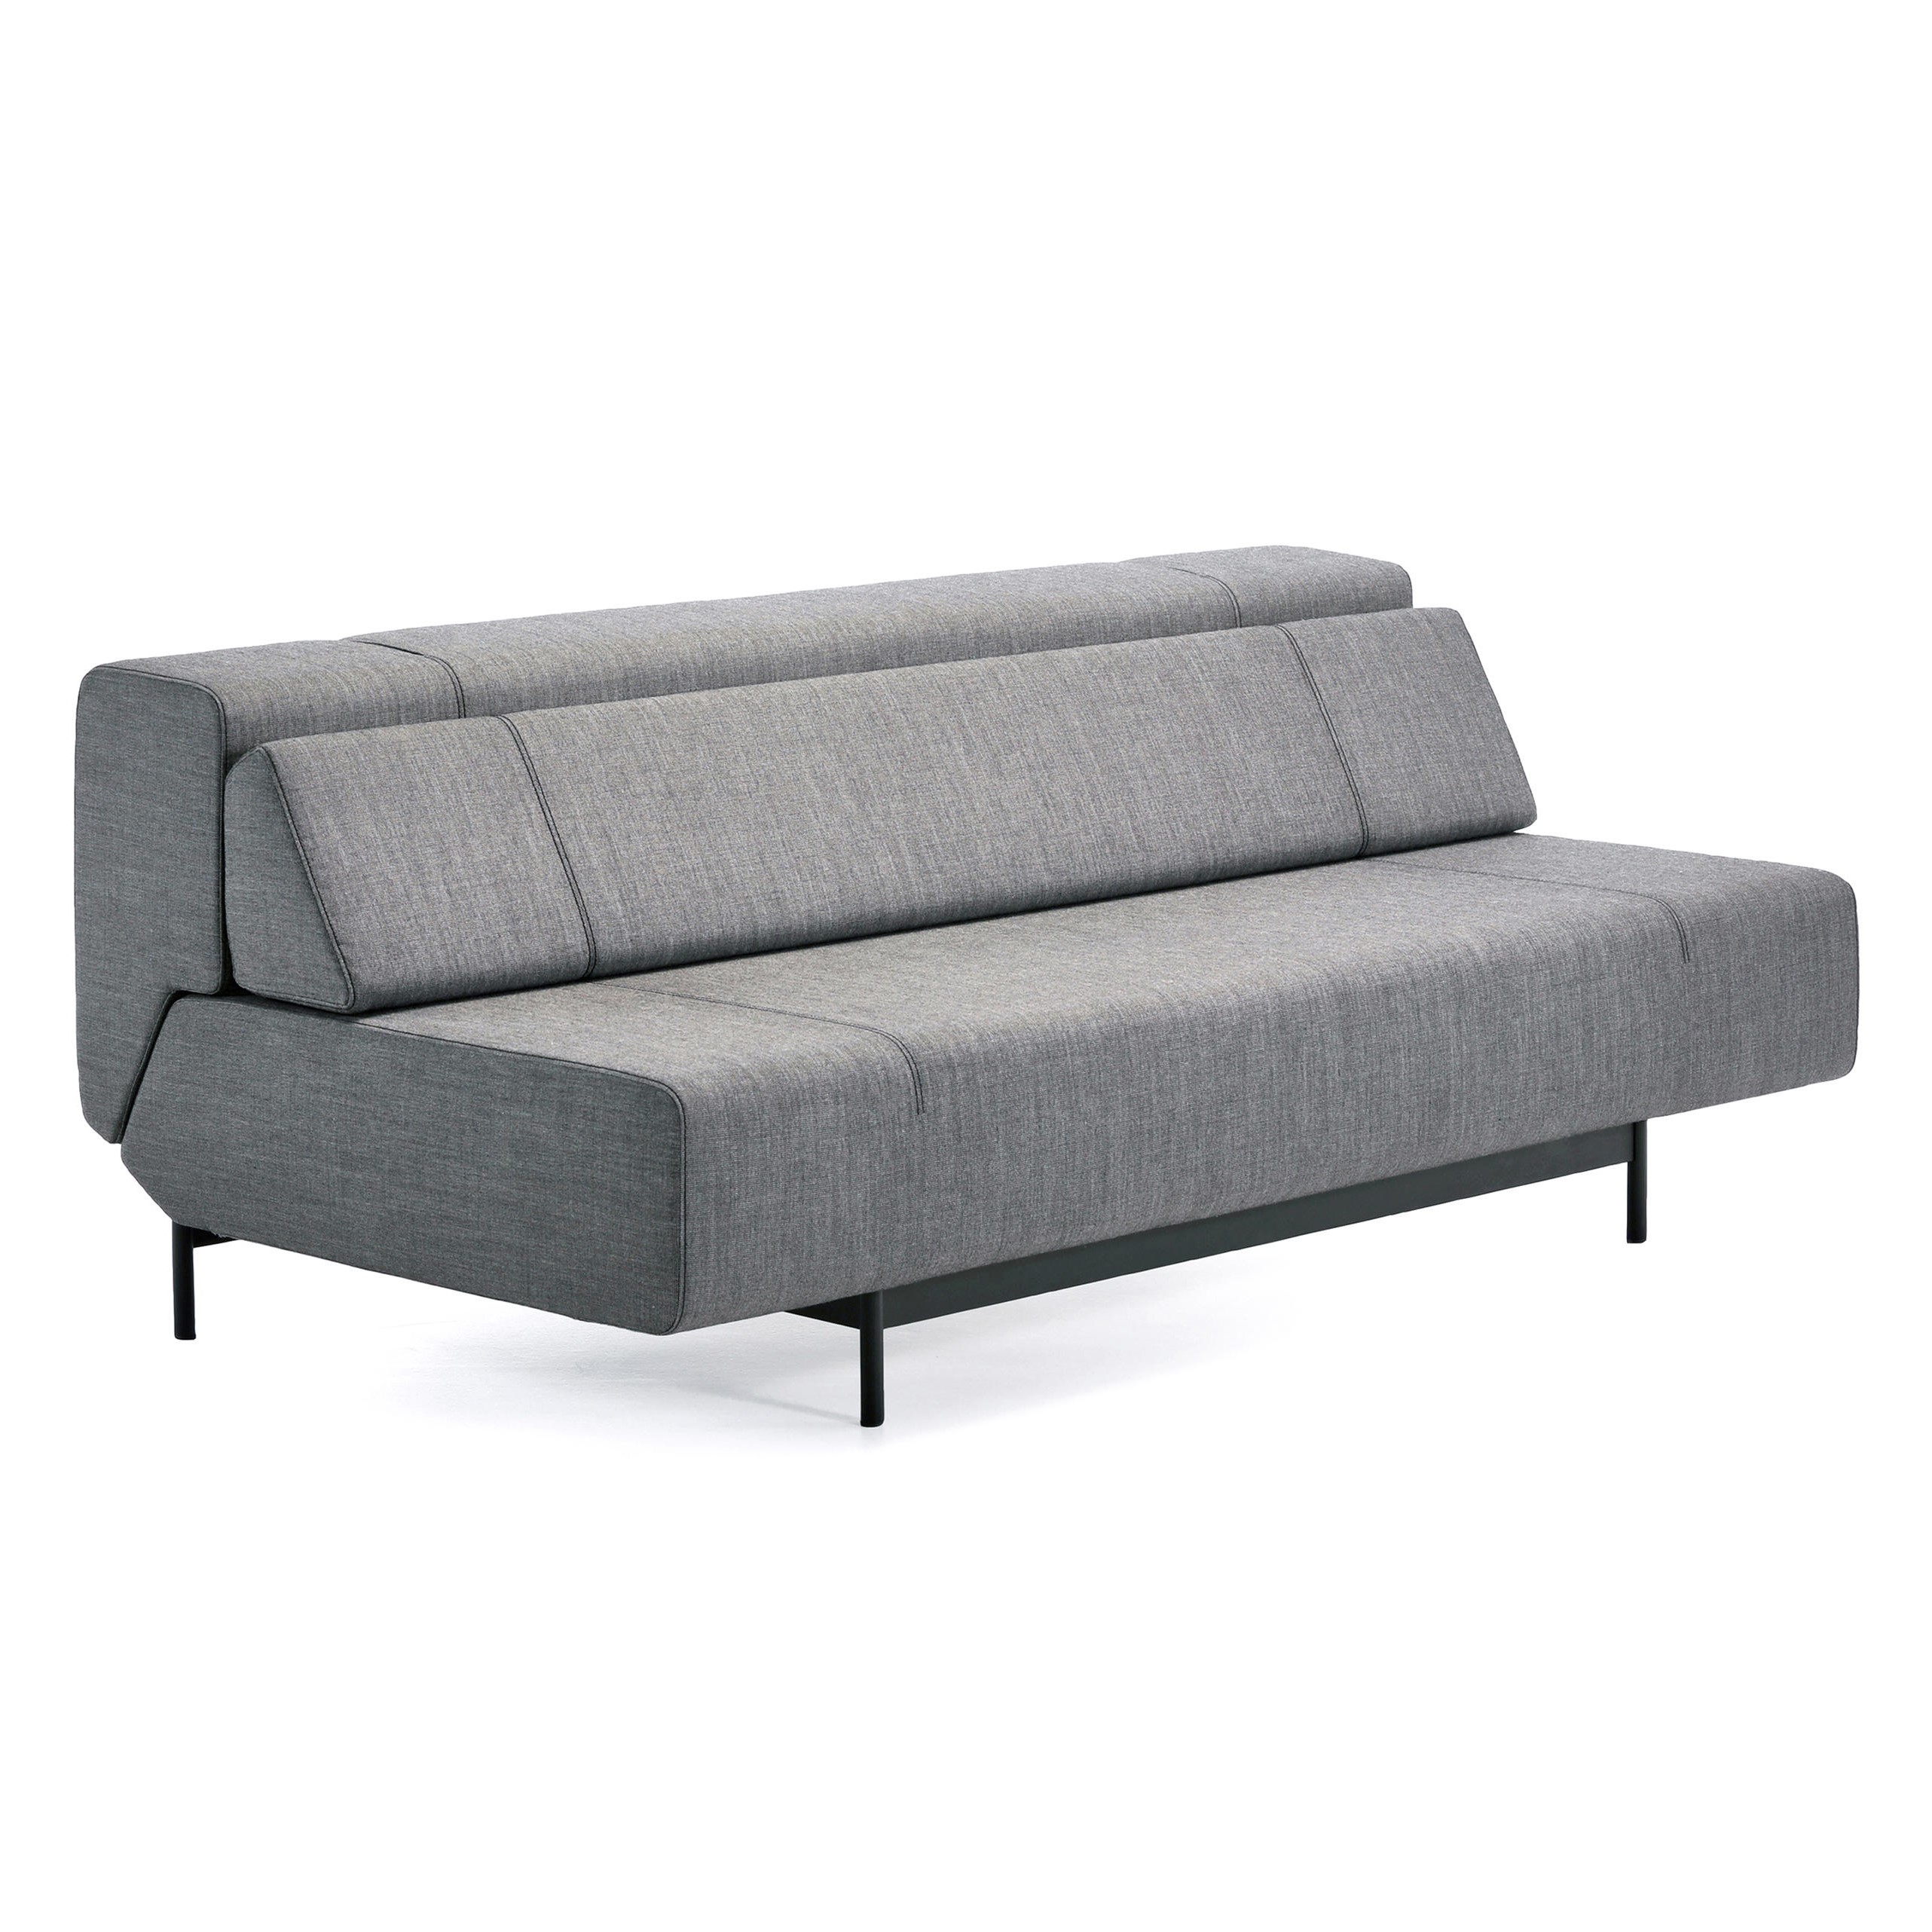 PIL-LOW 3seater sofa - double bed